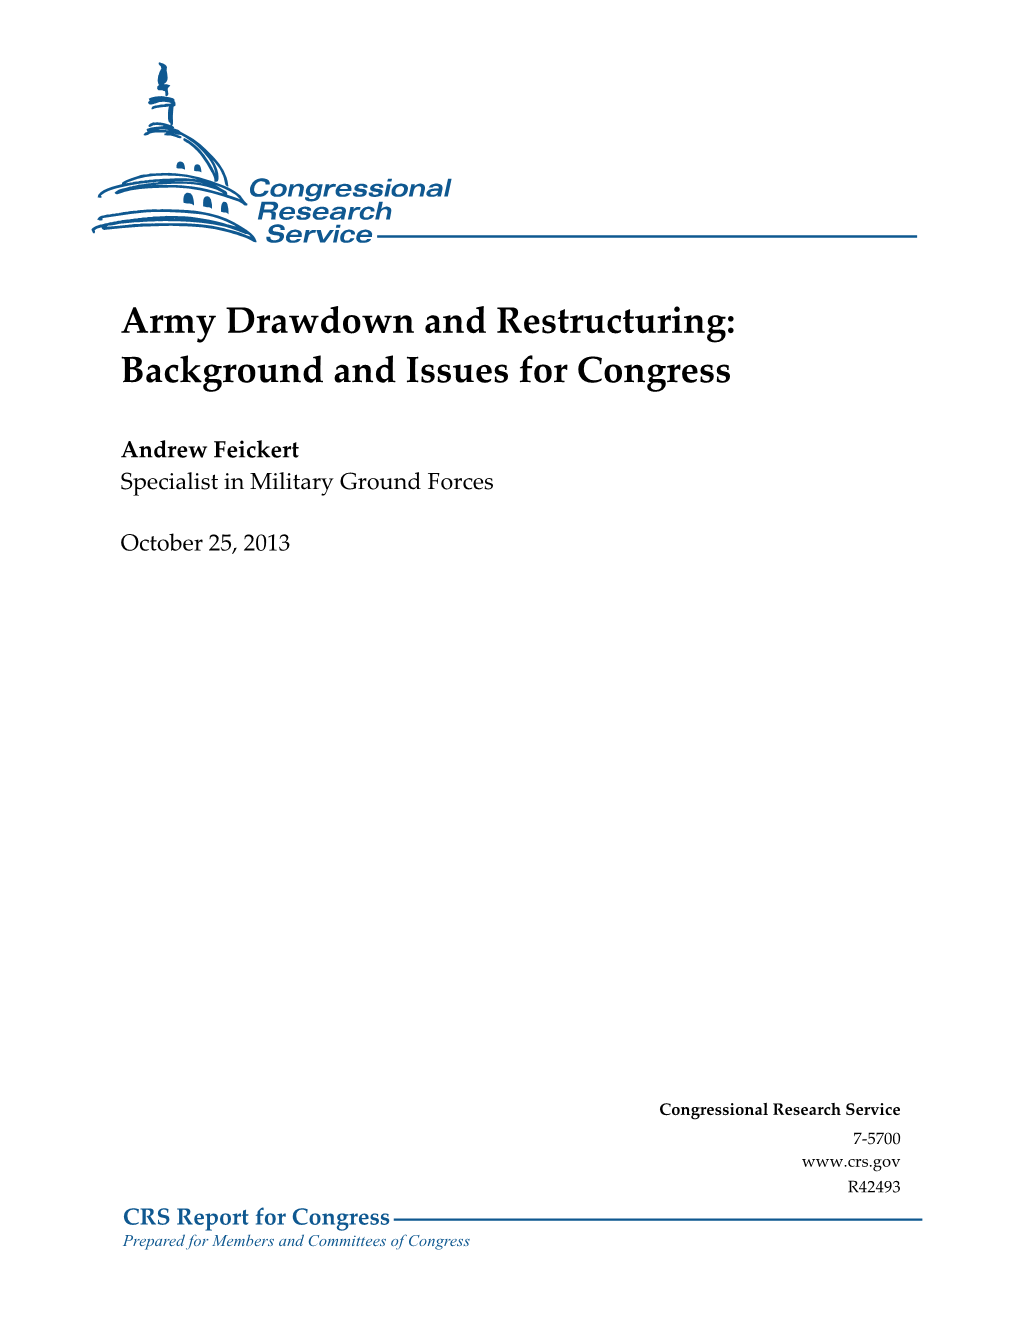 Army Drawdown and Restructuring: Background and Issues for Congress